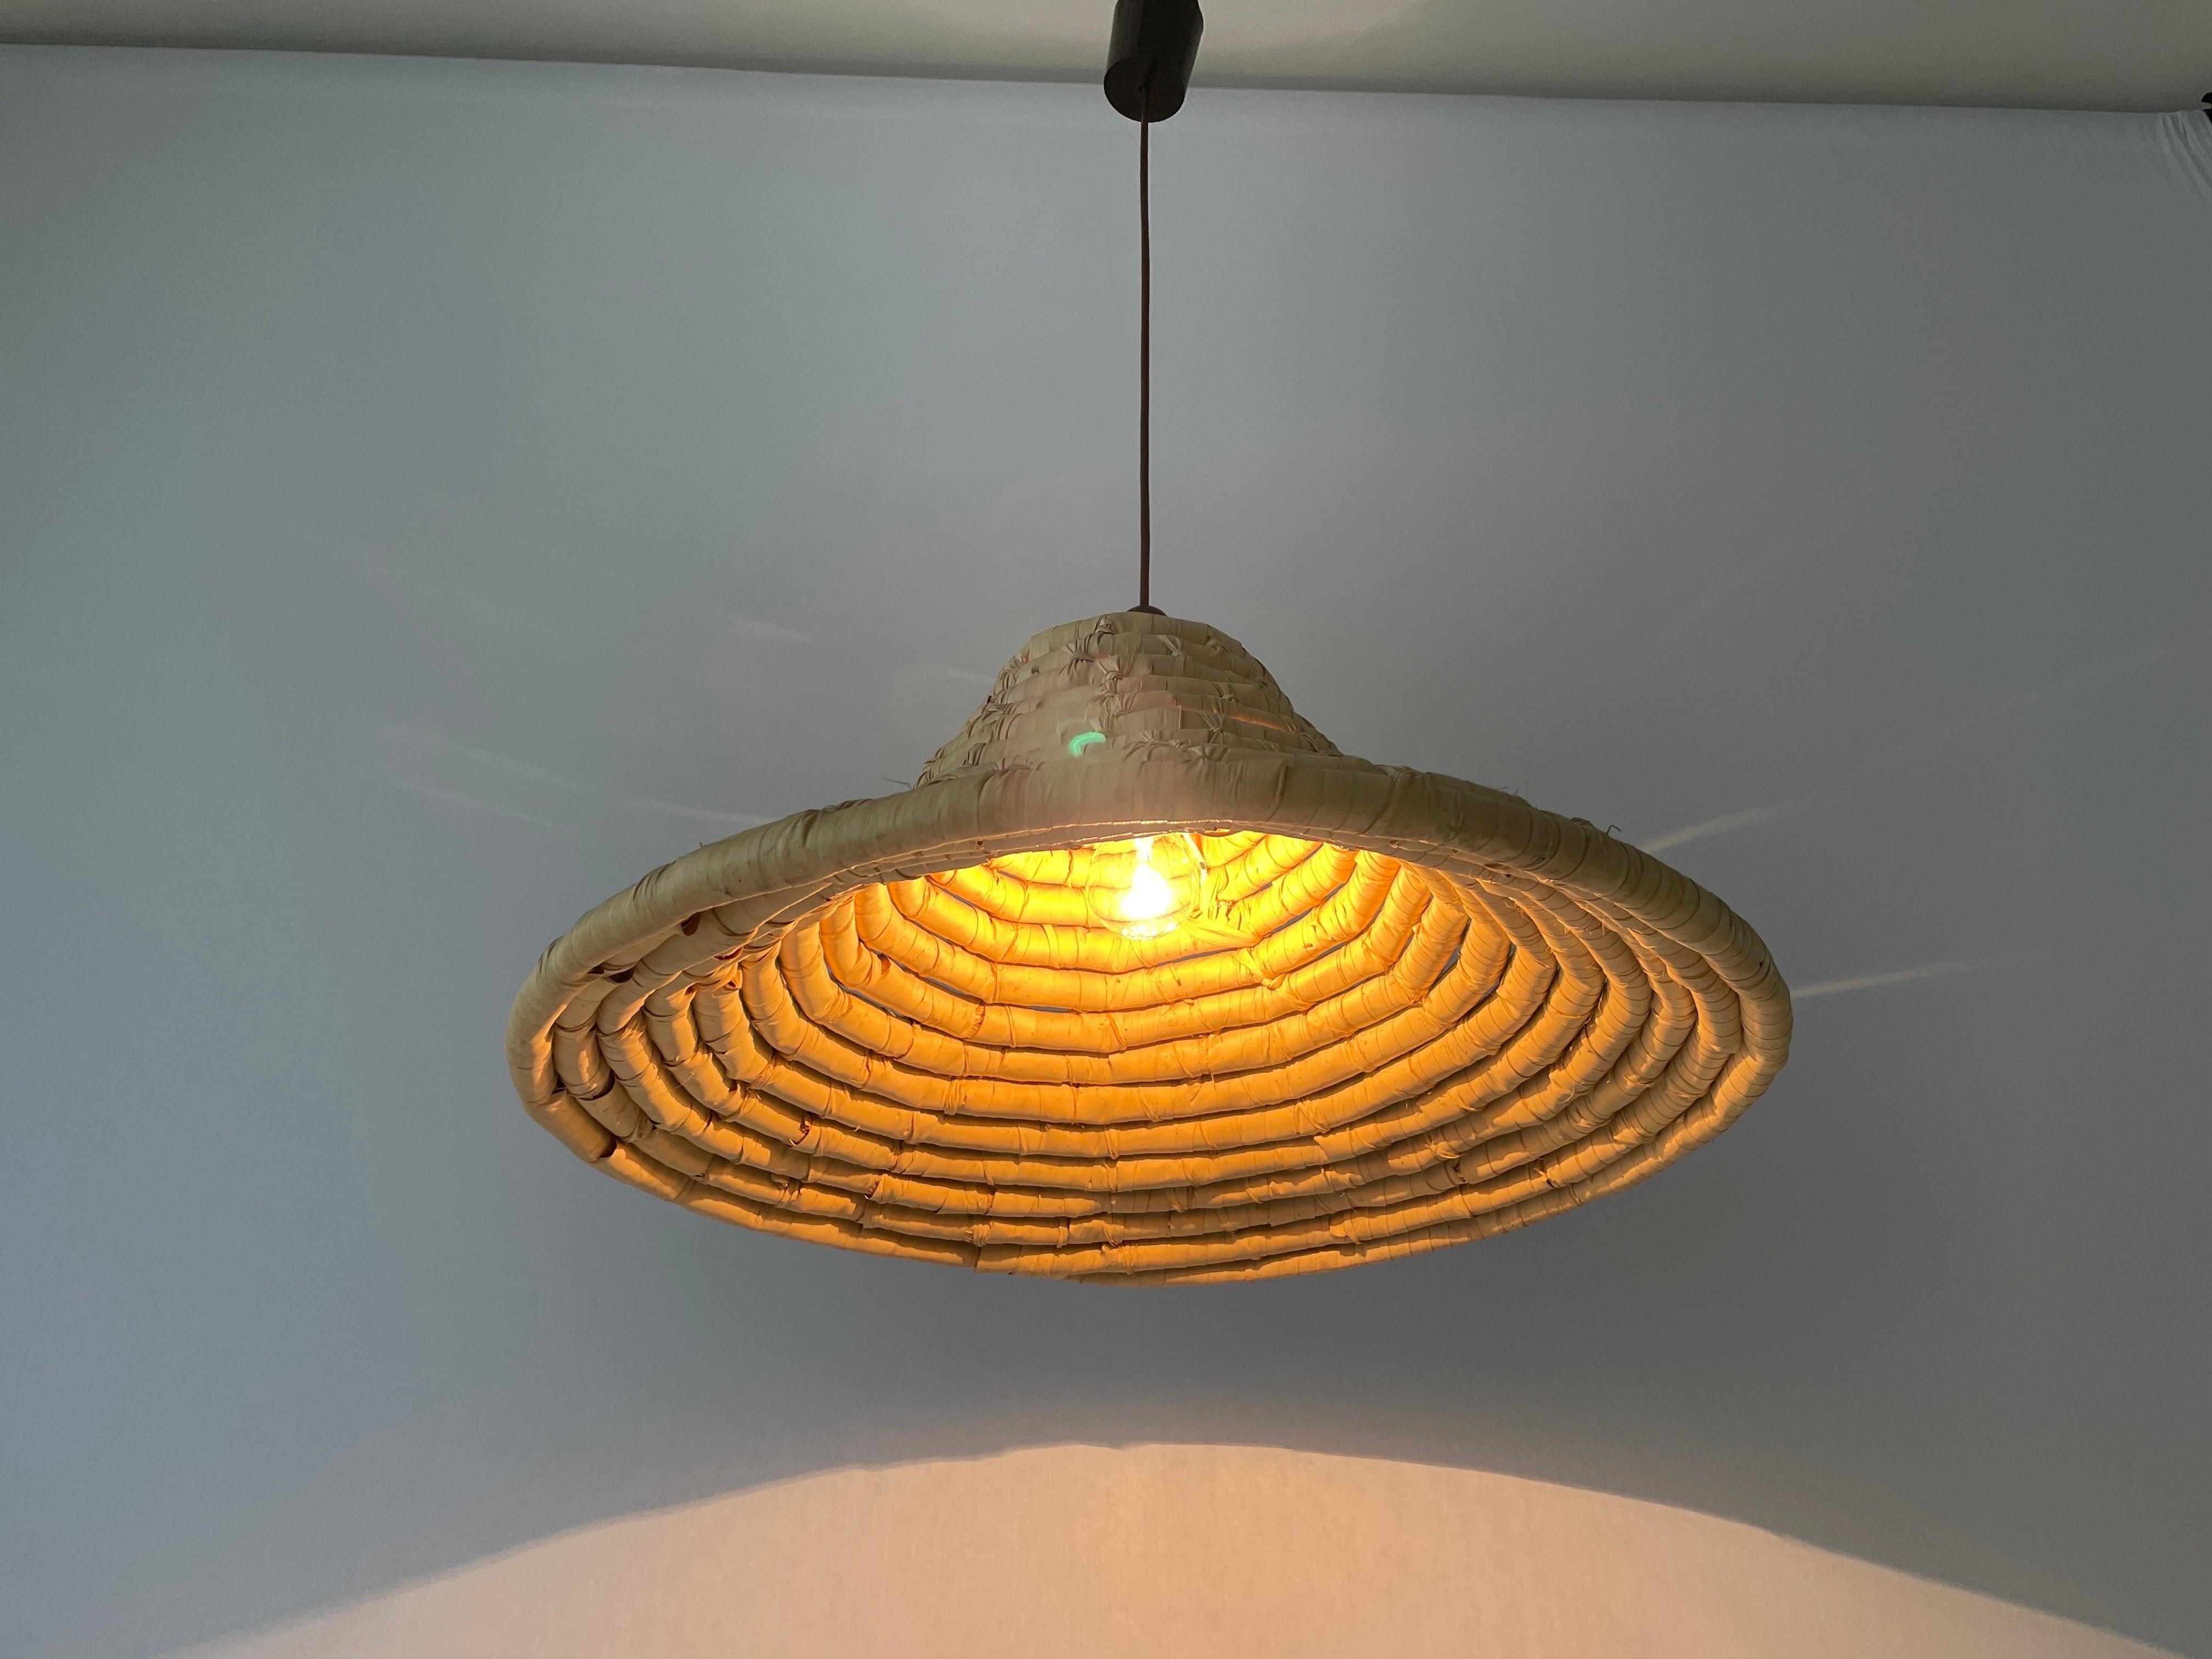 Unusual Large Made of Natural Plant Material Pendant Lamp, 1960s, Germany For Sale 10